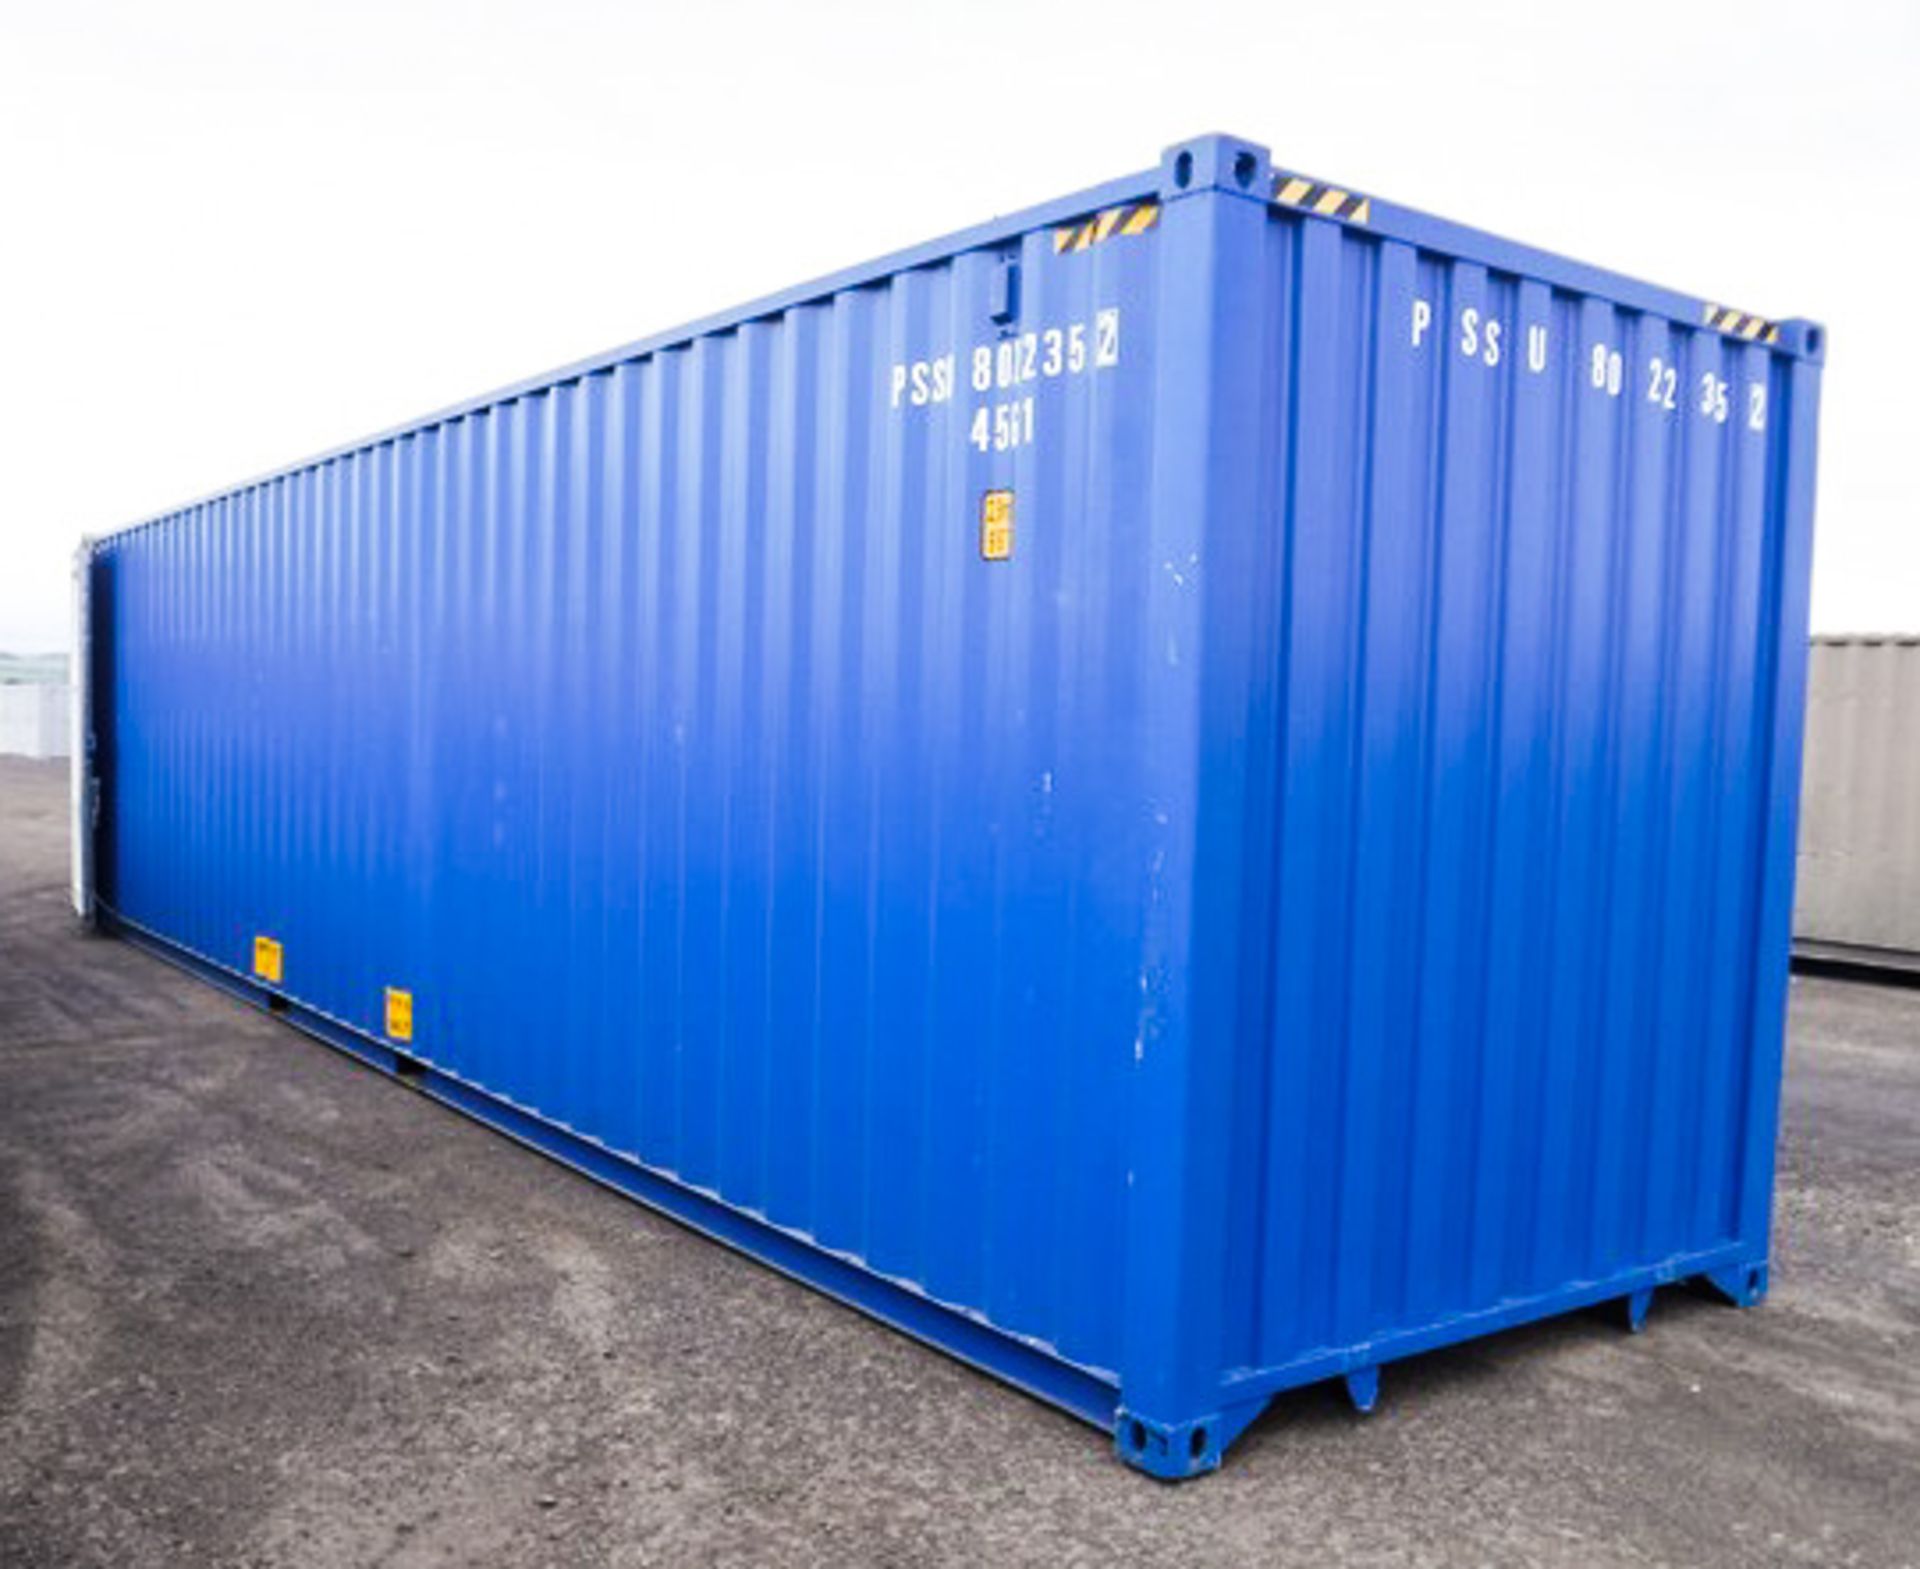 NEW ONE TRIP HIGH CUBE 40' X 8' X 9'6" SHIPPING CONTAINER, C/W FORK POCKETS, LIFTING POINTS & LOCK B